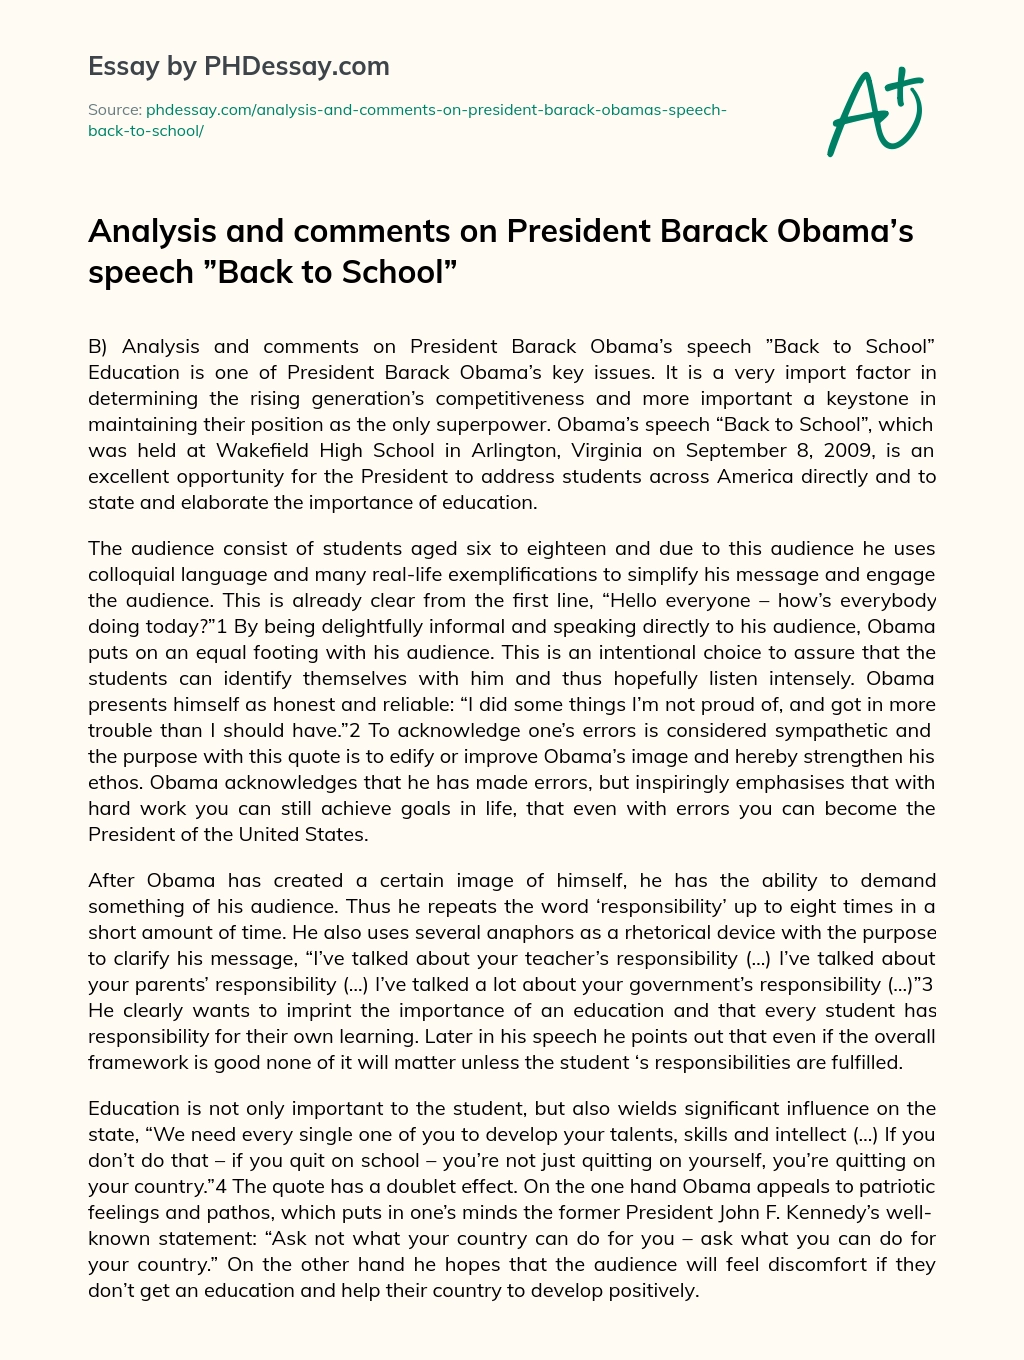 Analysis and comments on President Barack Obama’s speech ”Back to School” essay